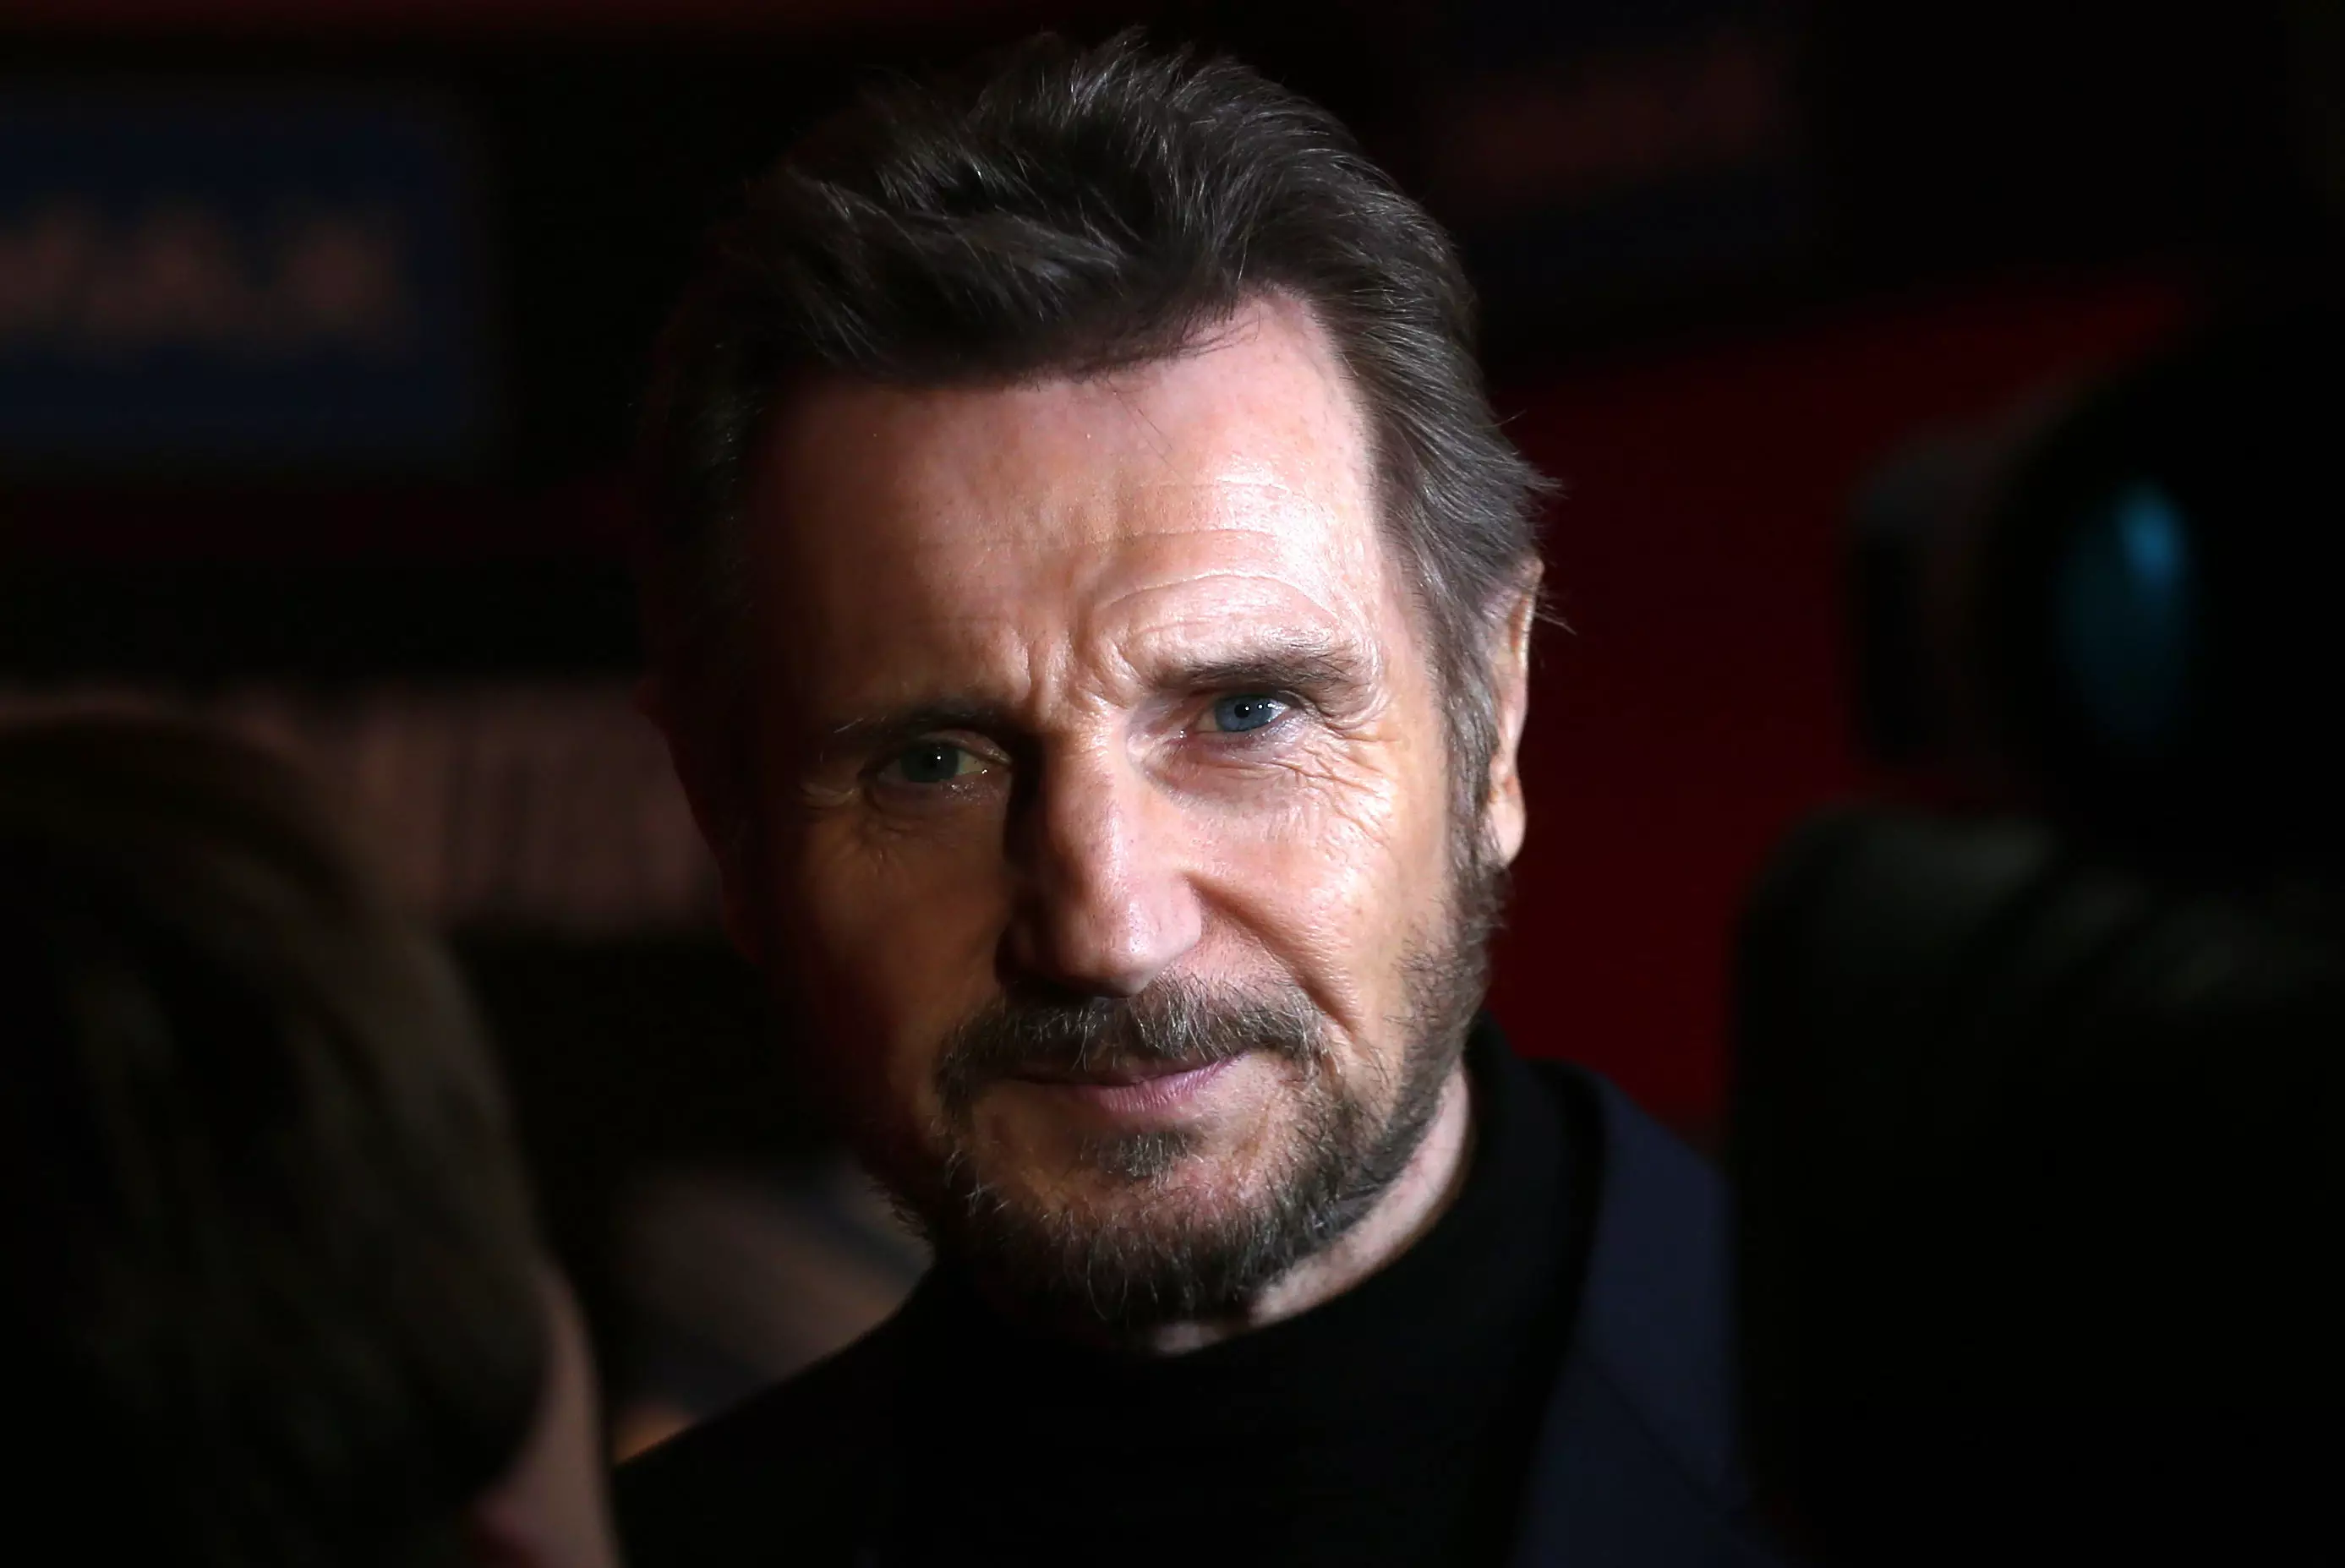 Liam Neeson's new film is number three in the US box office.